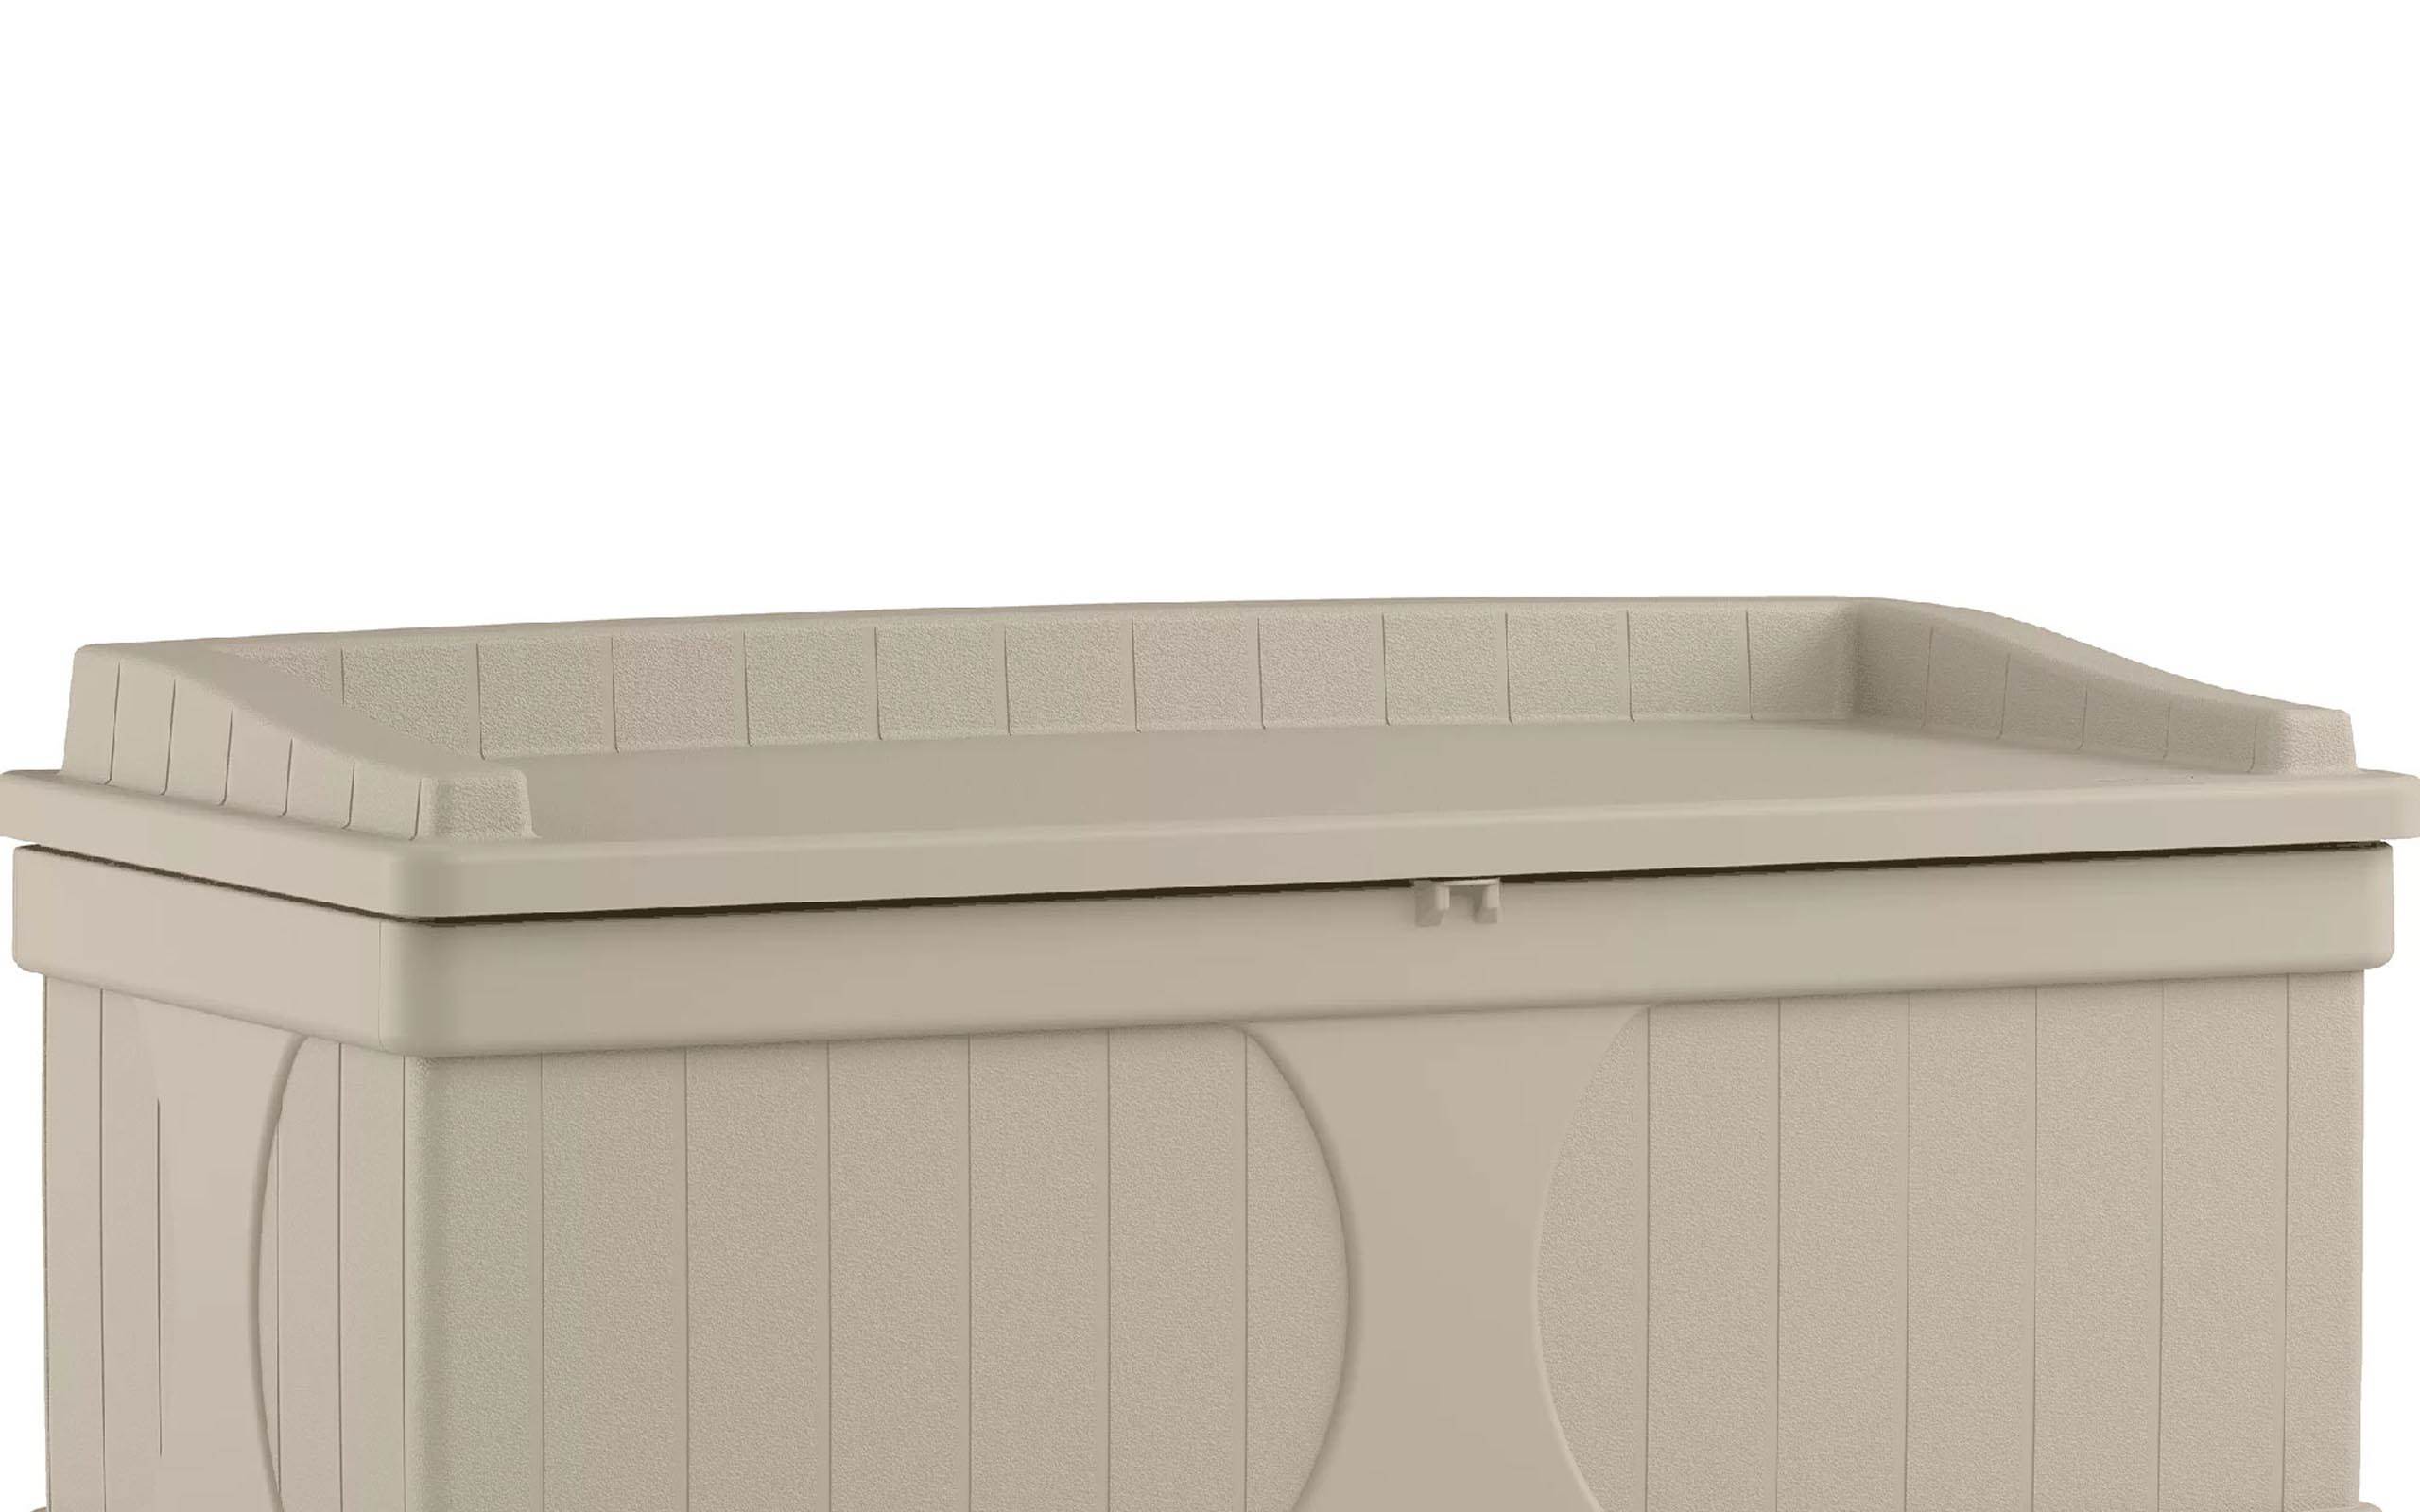 Suncast DB9500 99 Gallon Resin Outdoor Patio Storage Deck Box with Seat, Taupe - image 2 of 4